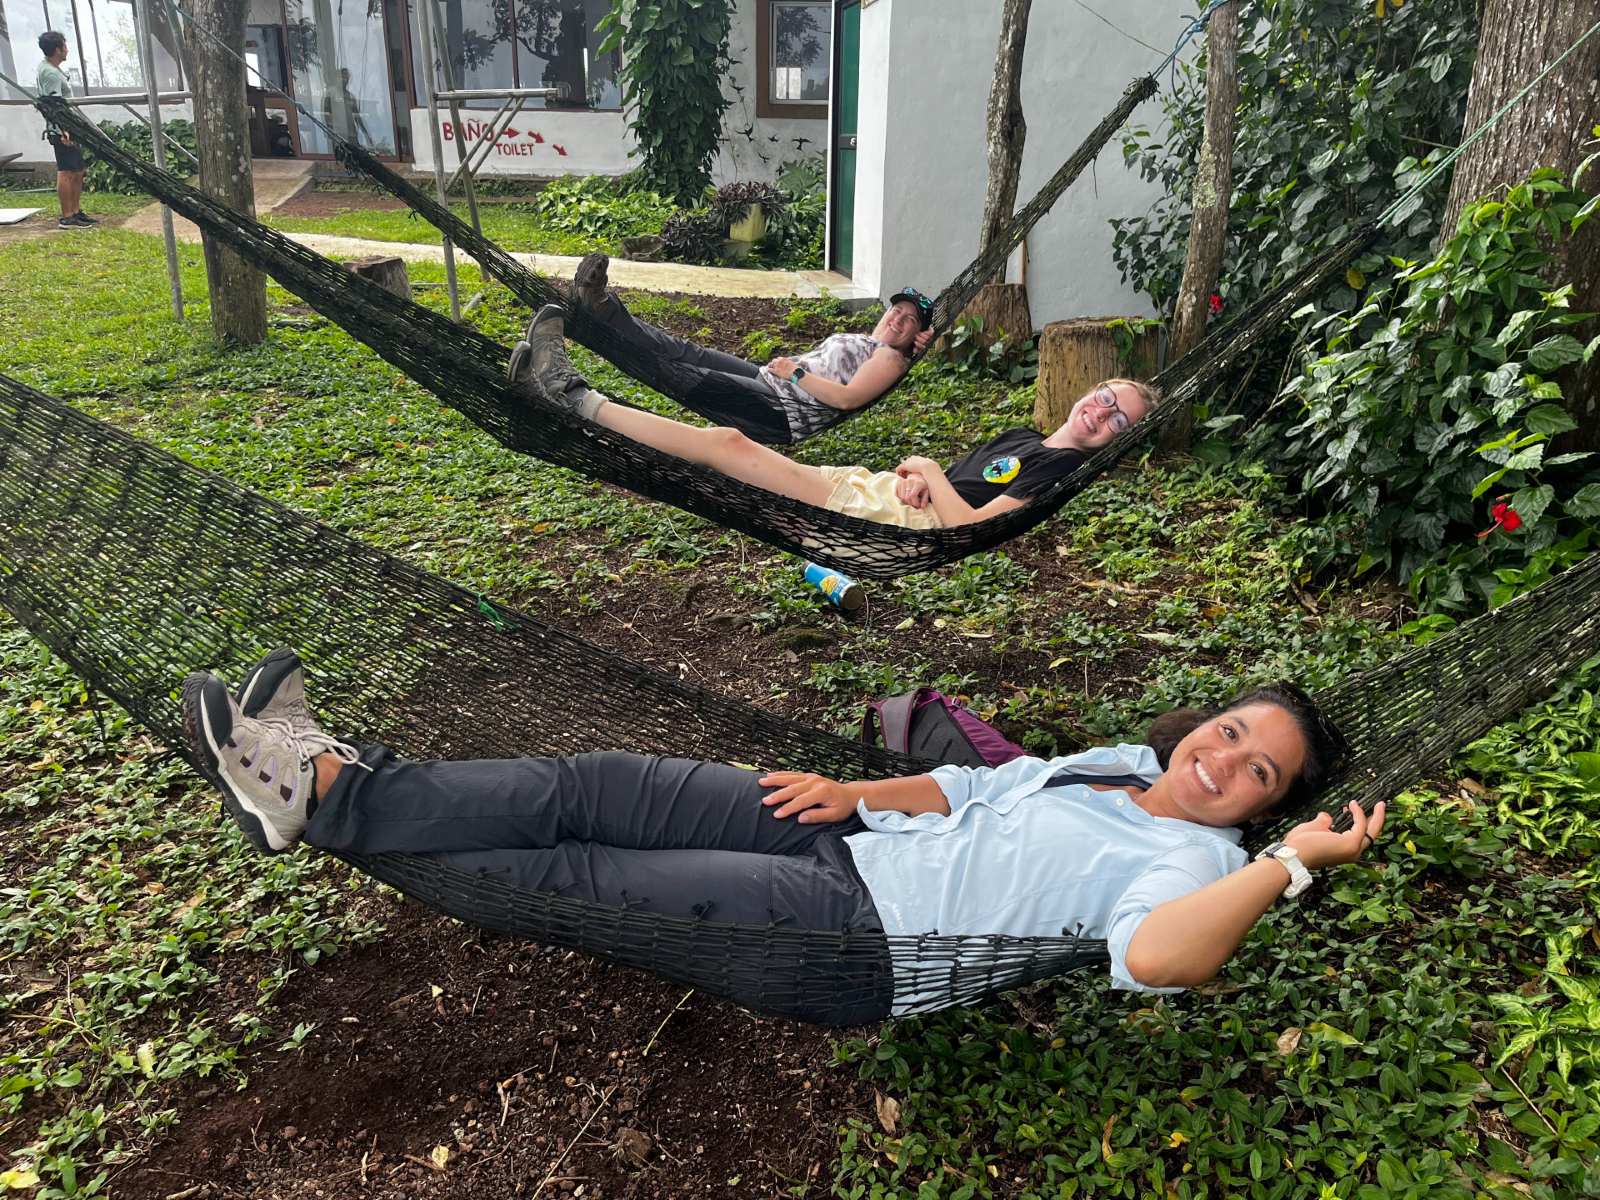 Students hanging on a hammock.